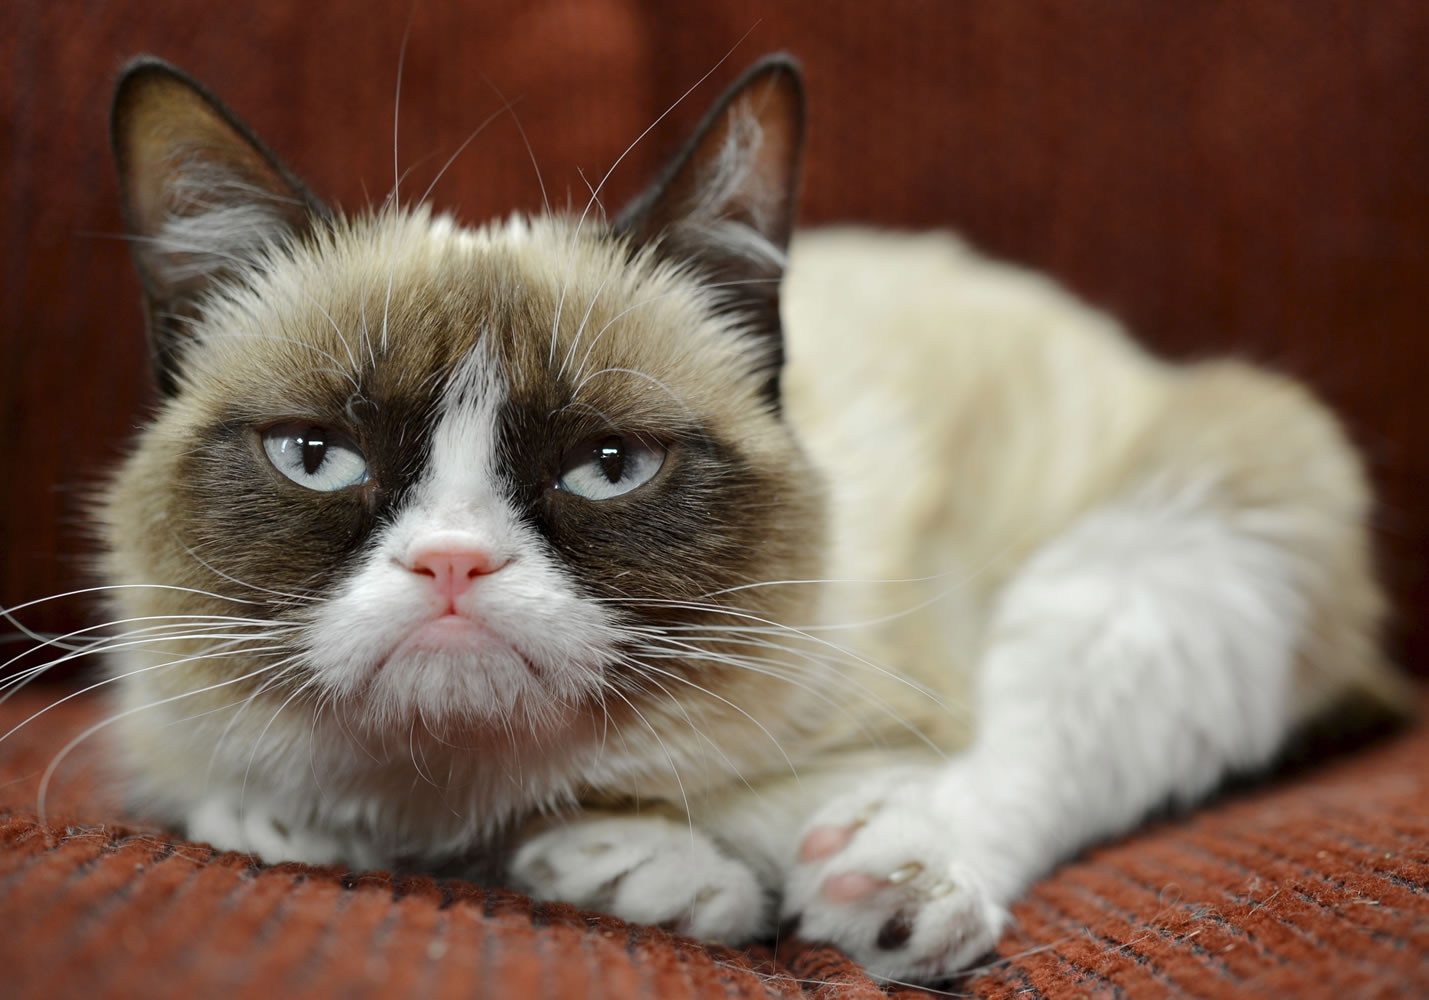 It probably won't affect her famous mood, but Grumpy Cat now has an endorsement deal.